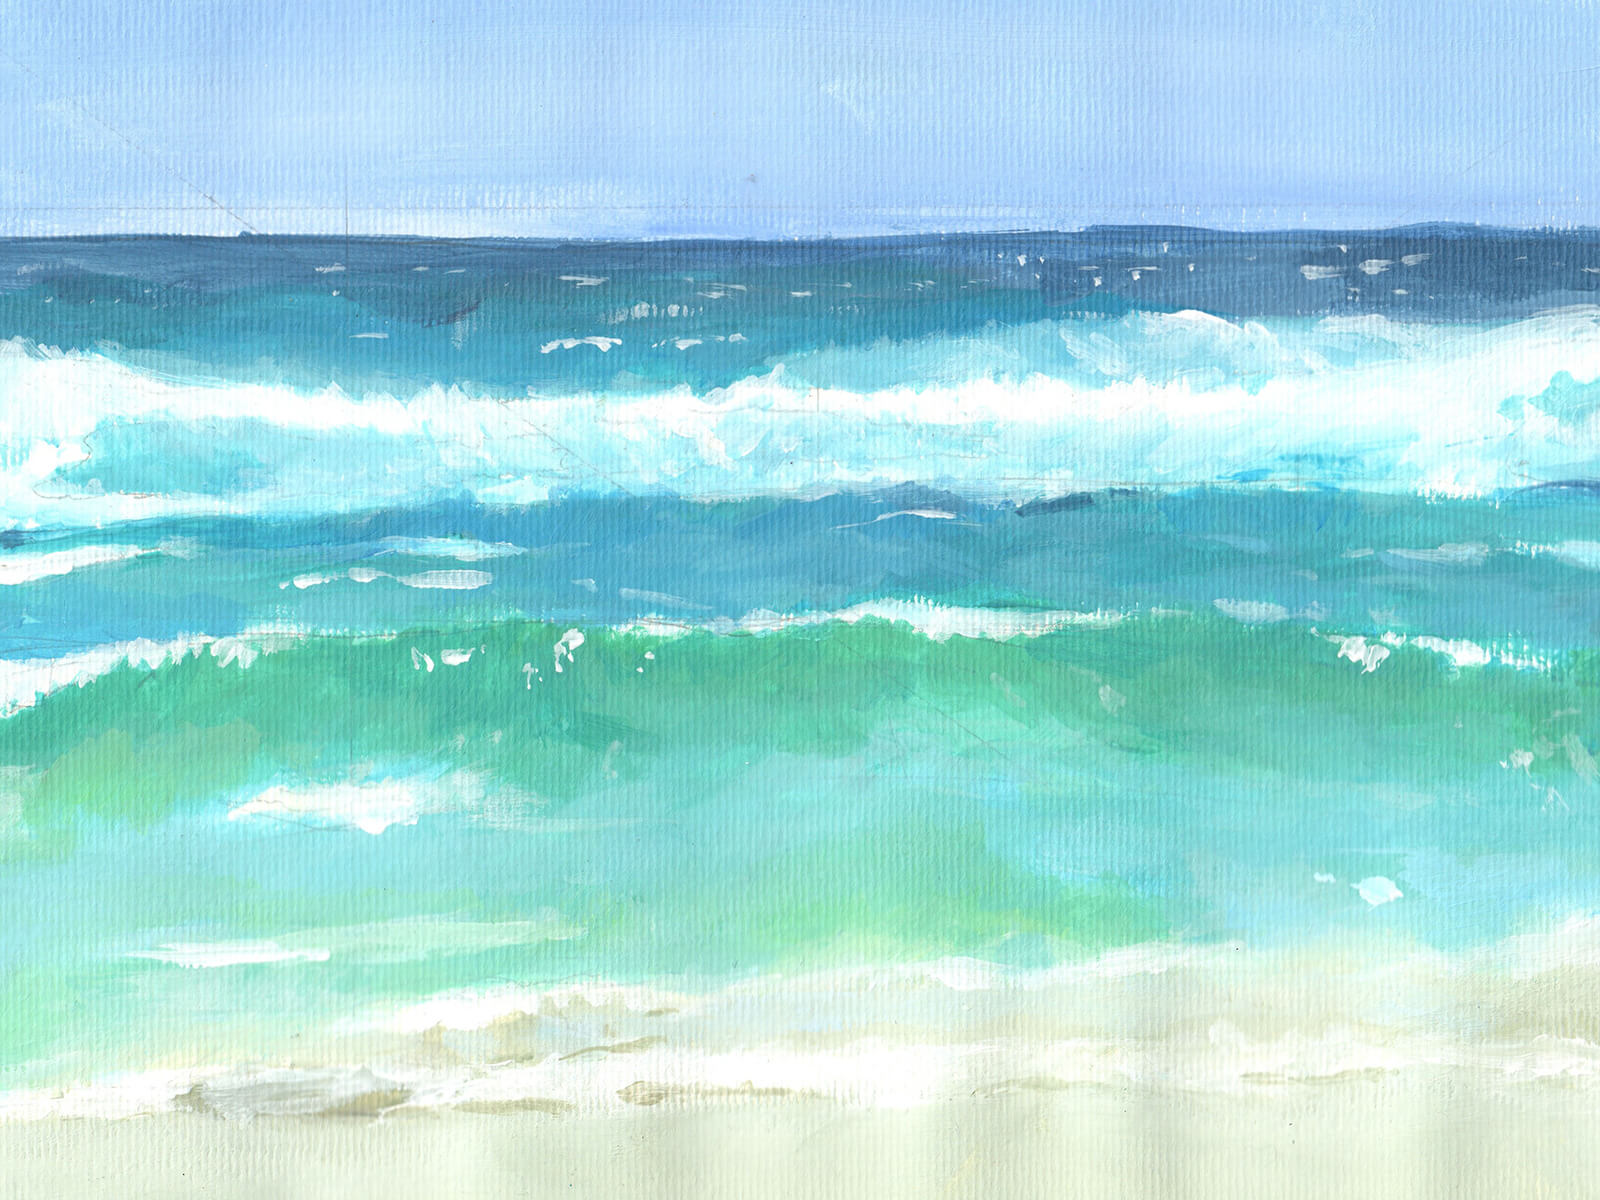 Landscape painting of waves cresting toward the viewer on a sandy beach. Hues of blue get darker the further out one looks.